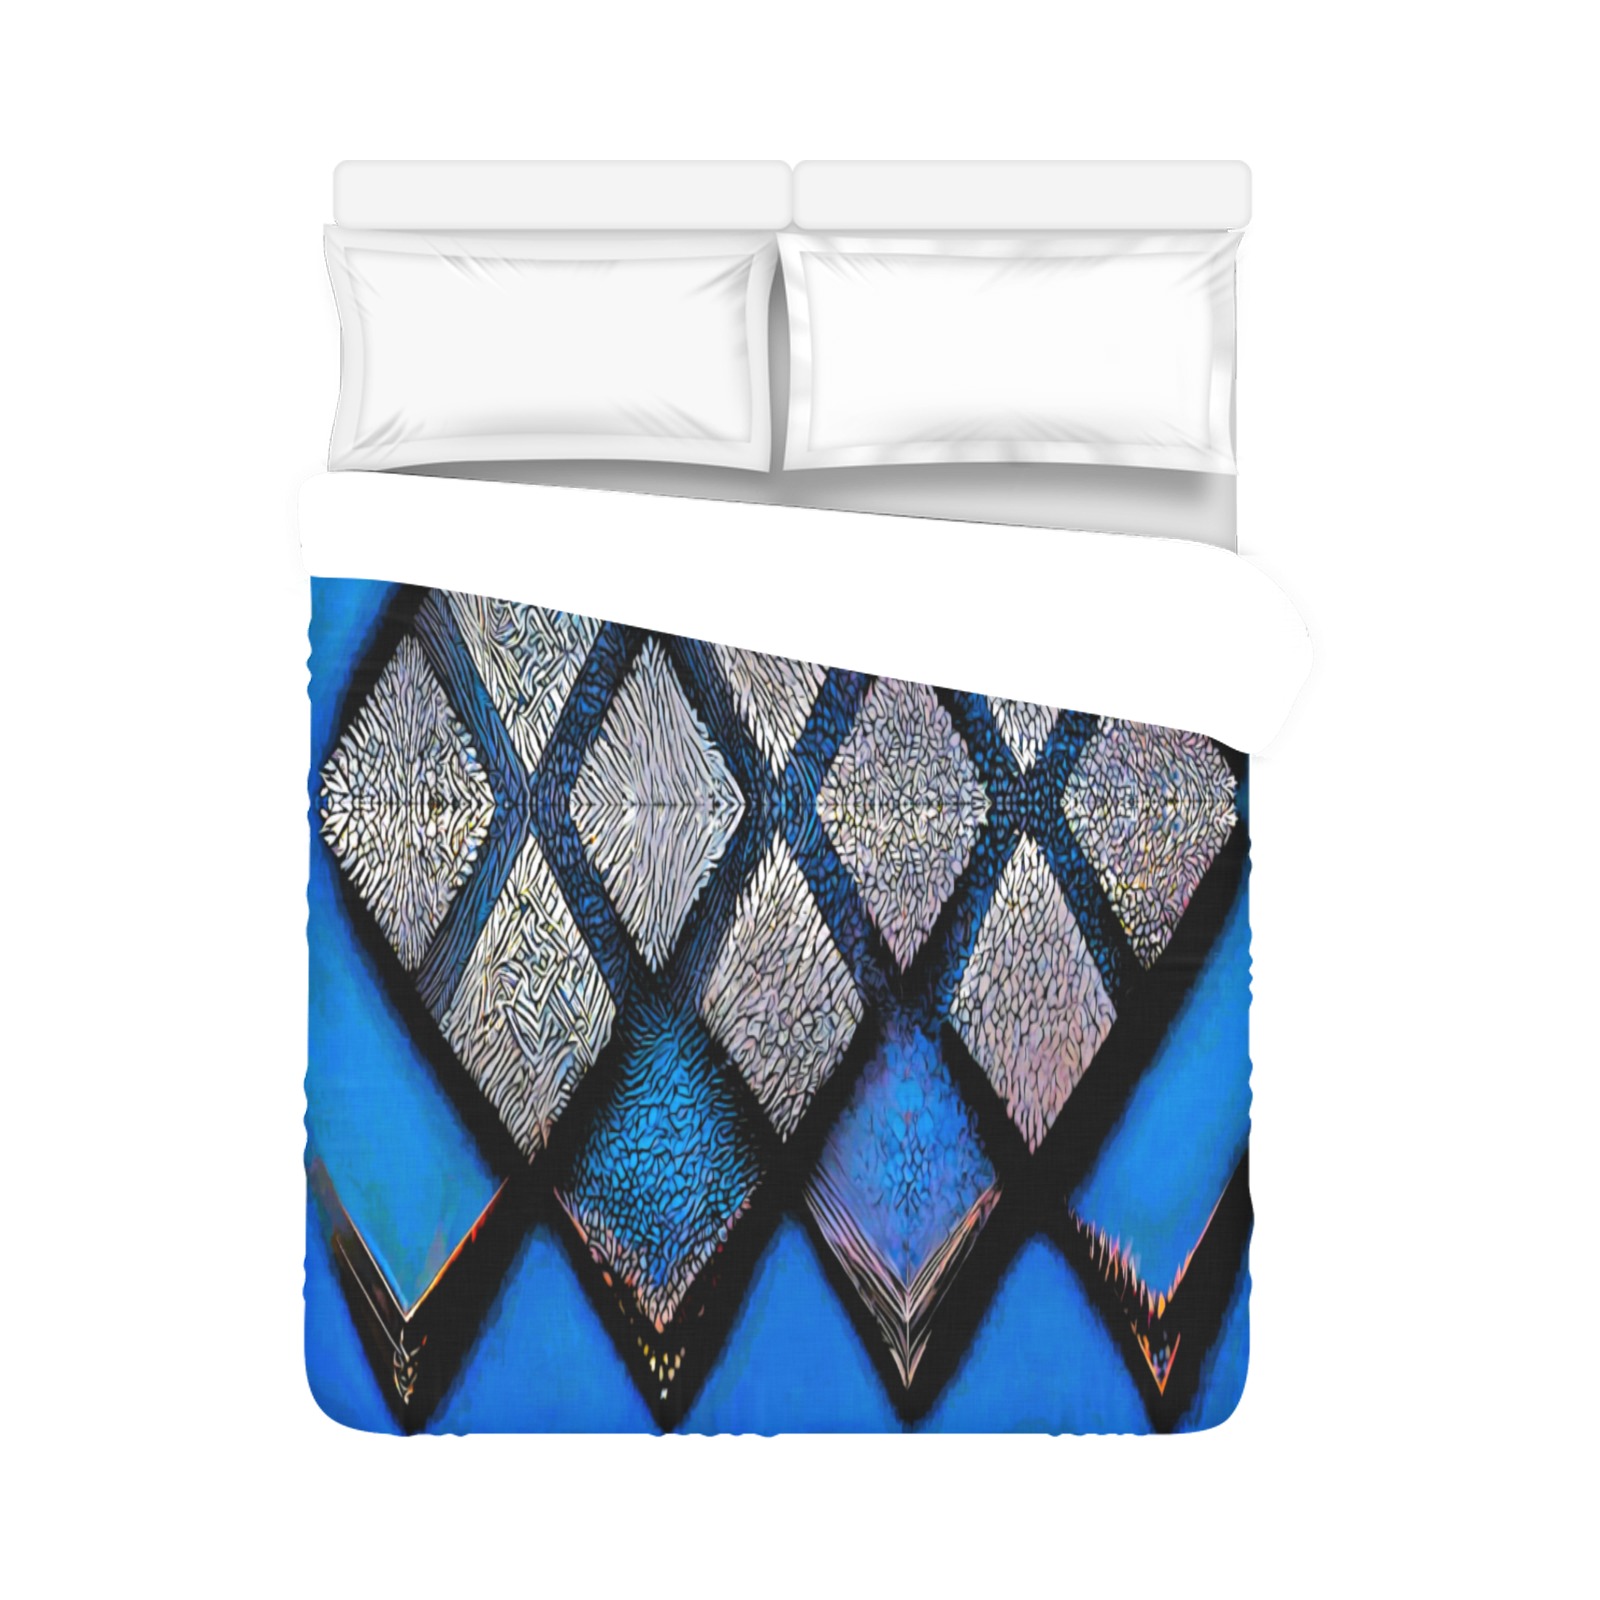 blue and silver diamond's Duvet Cover 86"x70" ( All-over-print)